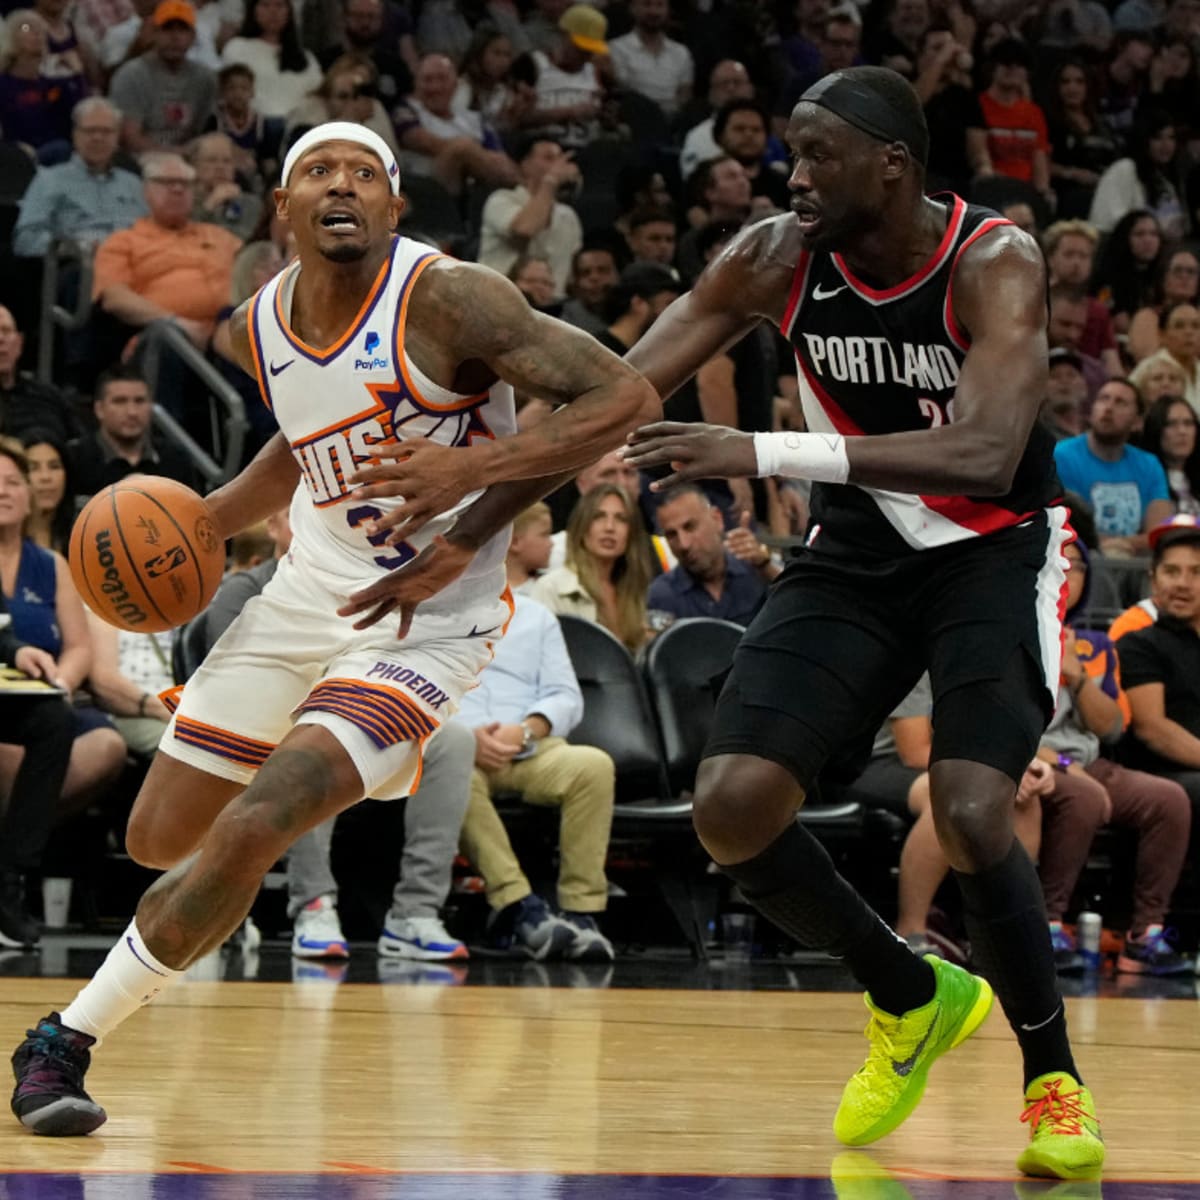 Phoenix Suns Big 3 Devin Booker, Kevin Durant and Bradley Beal pushing each  other